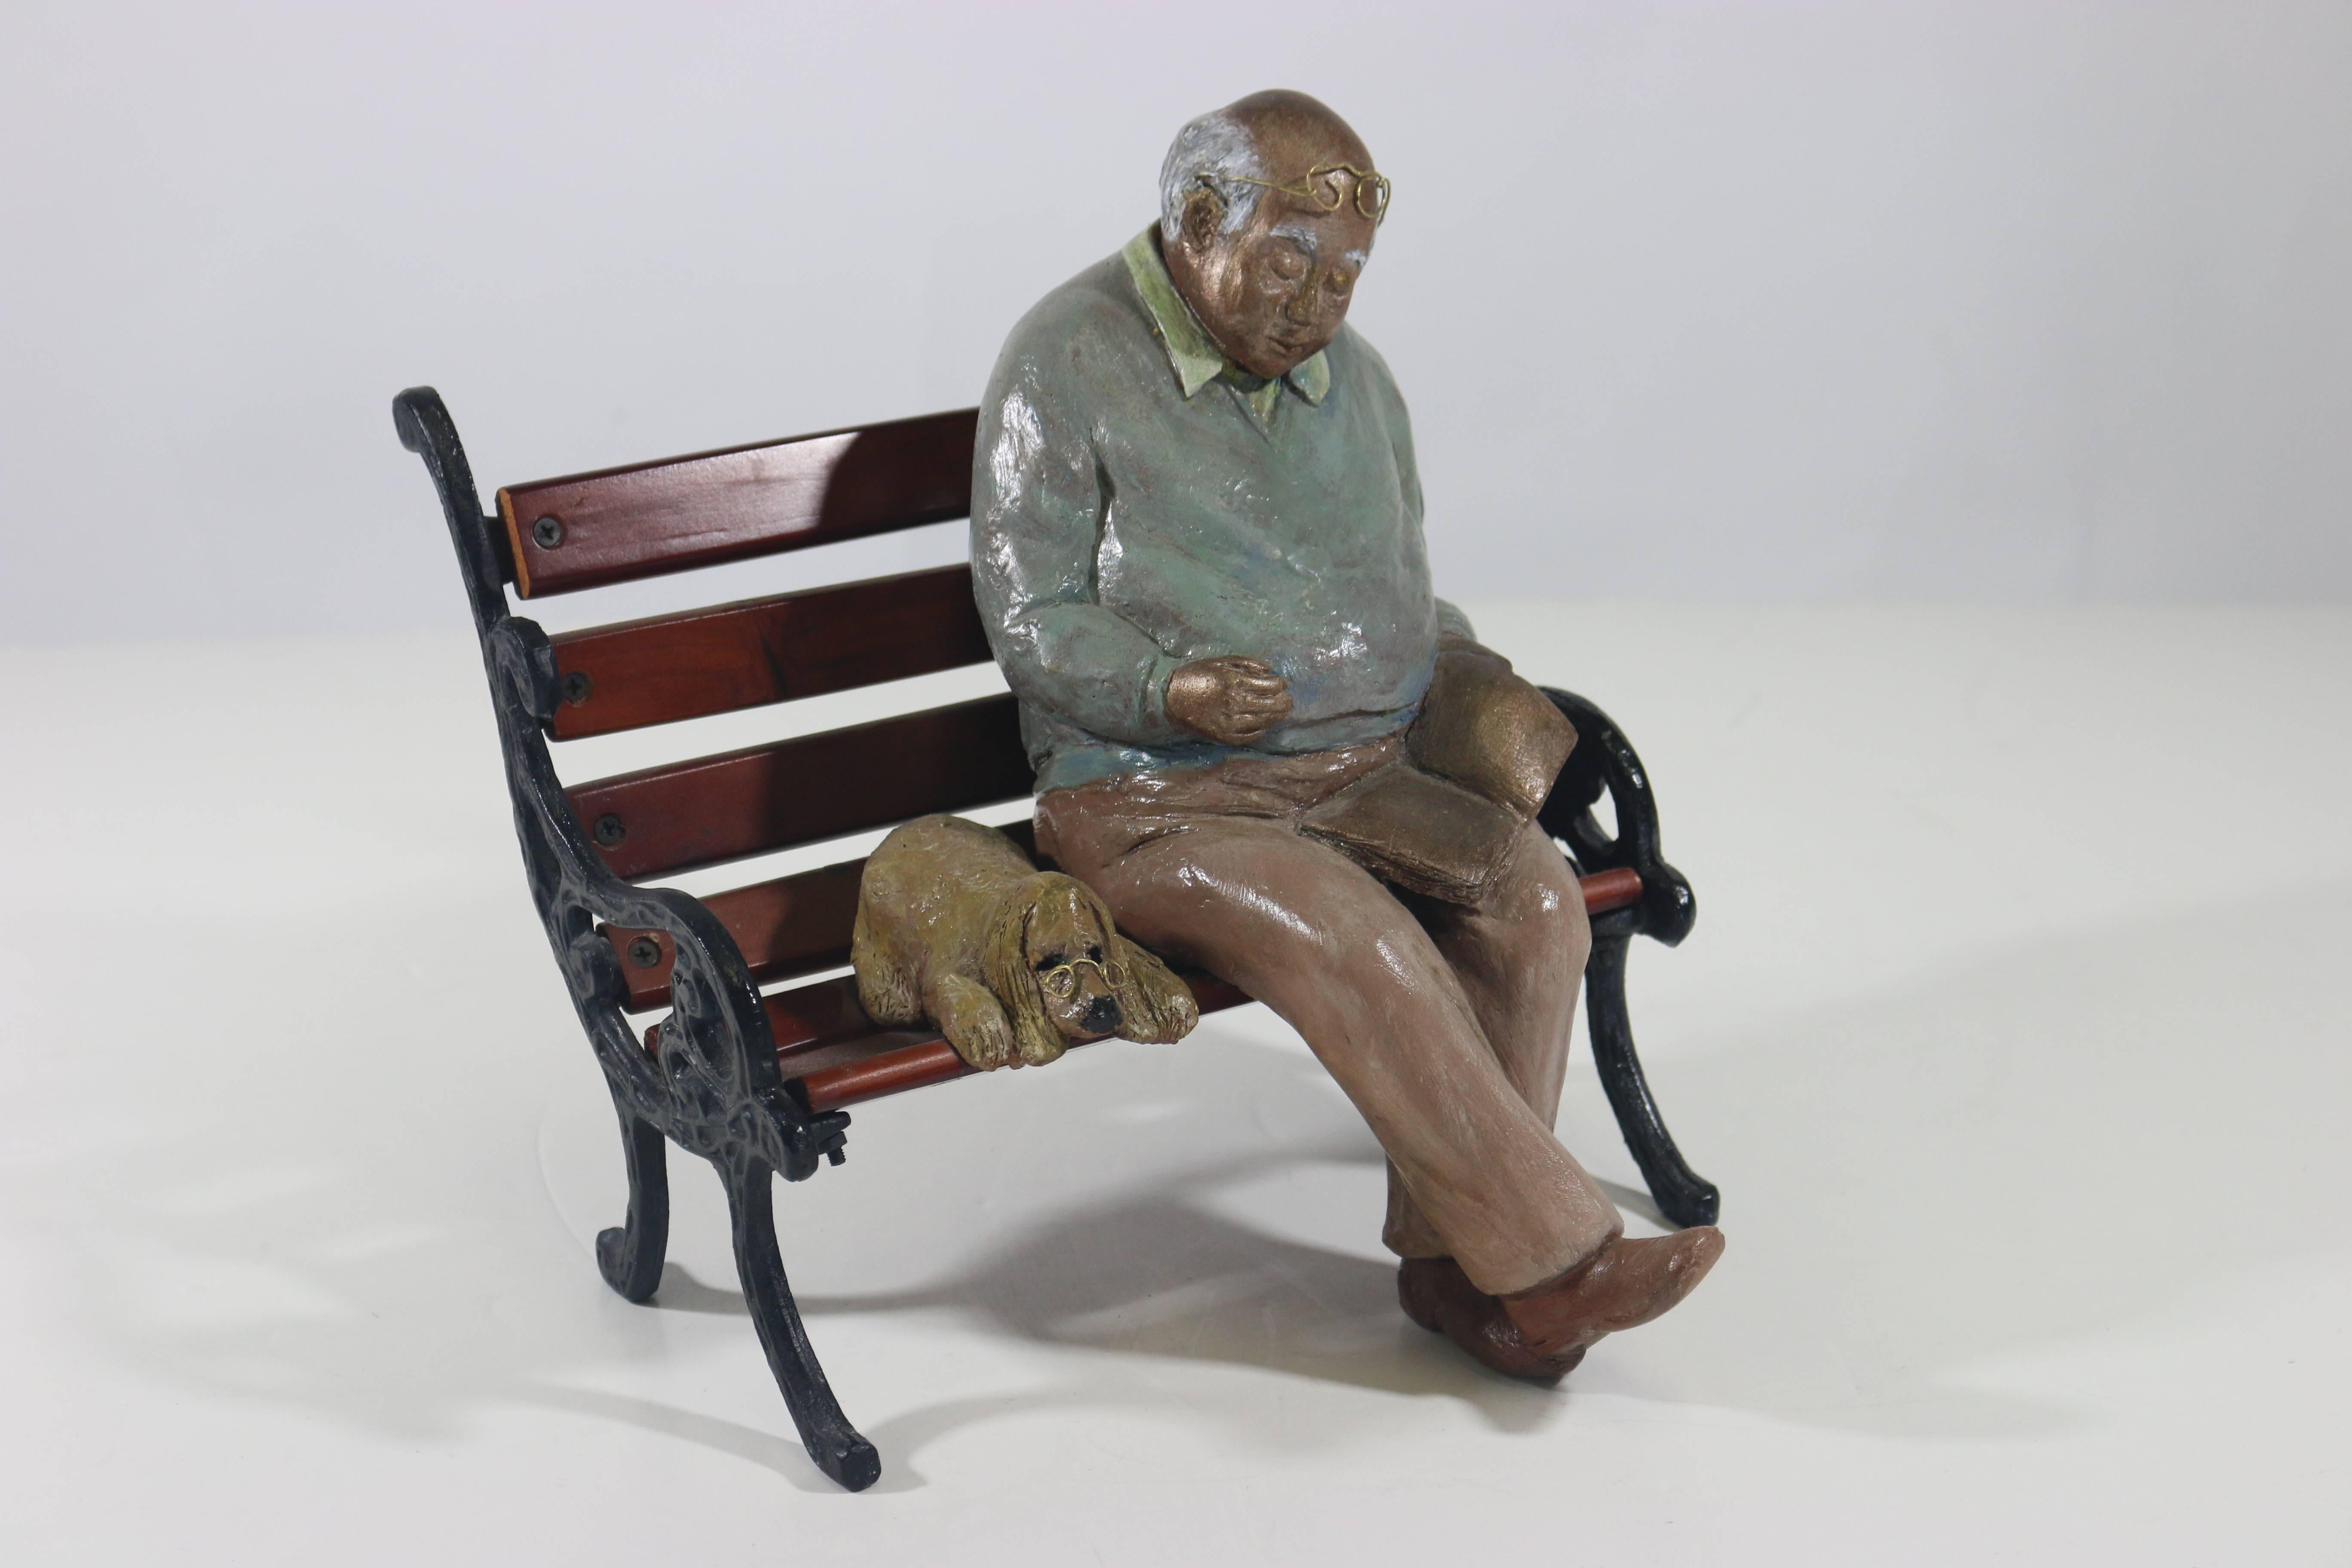 American Whimsical Folk Art Mixed Media Sculpture 'Waiting for Godot' 20th Century Artist For Sale